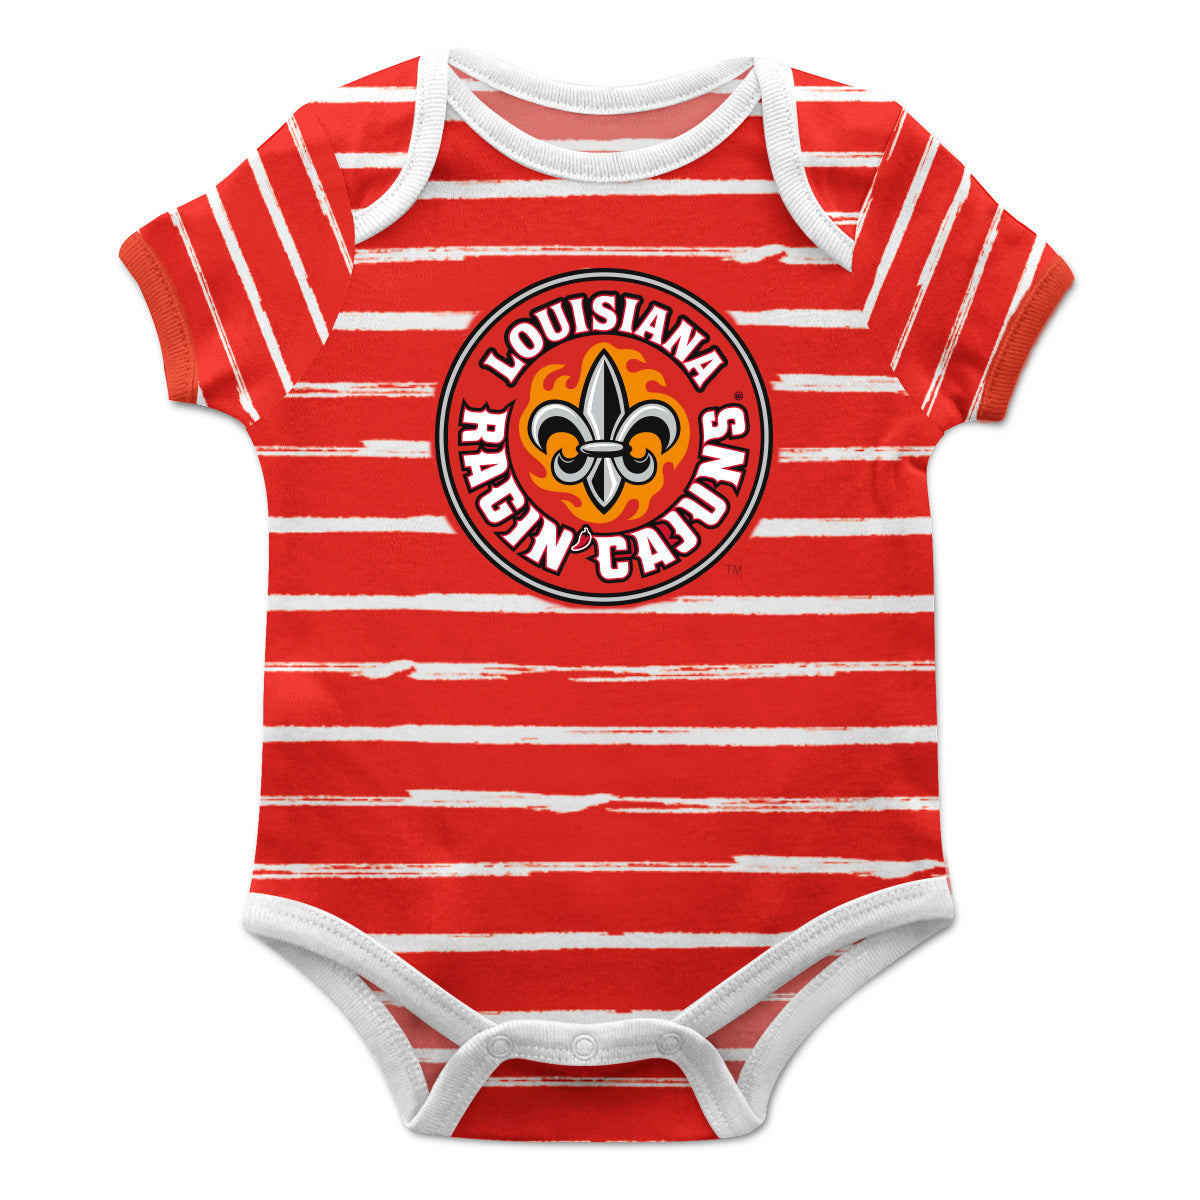 Louisiana At Lafayette Stripe Red and White Boys One Piece Jumpsuit SS by Vive La Fete